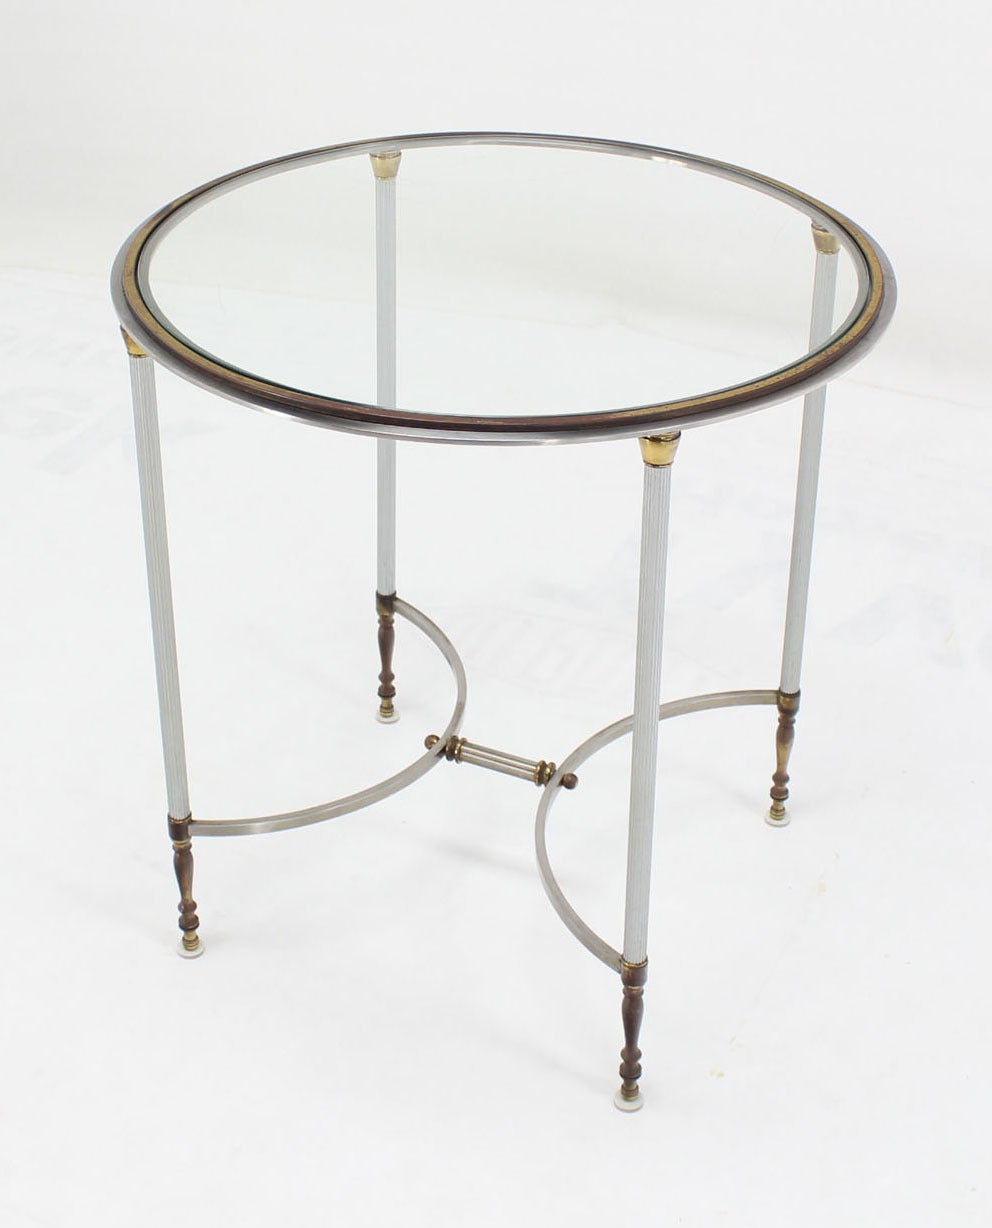 Very nice mid-century modern mixed metals gueridon center side table.